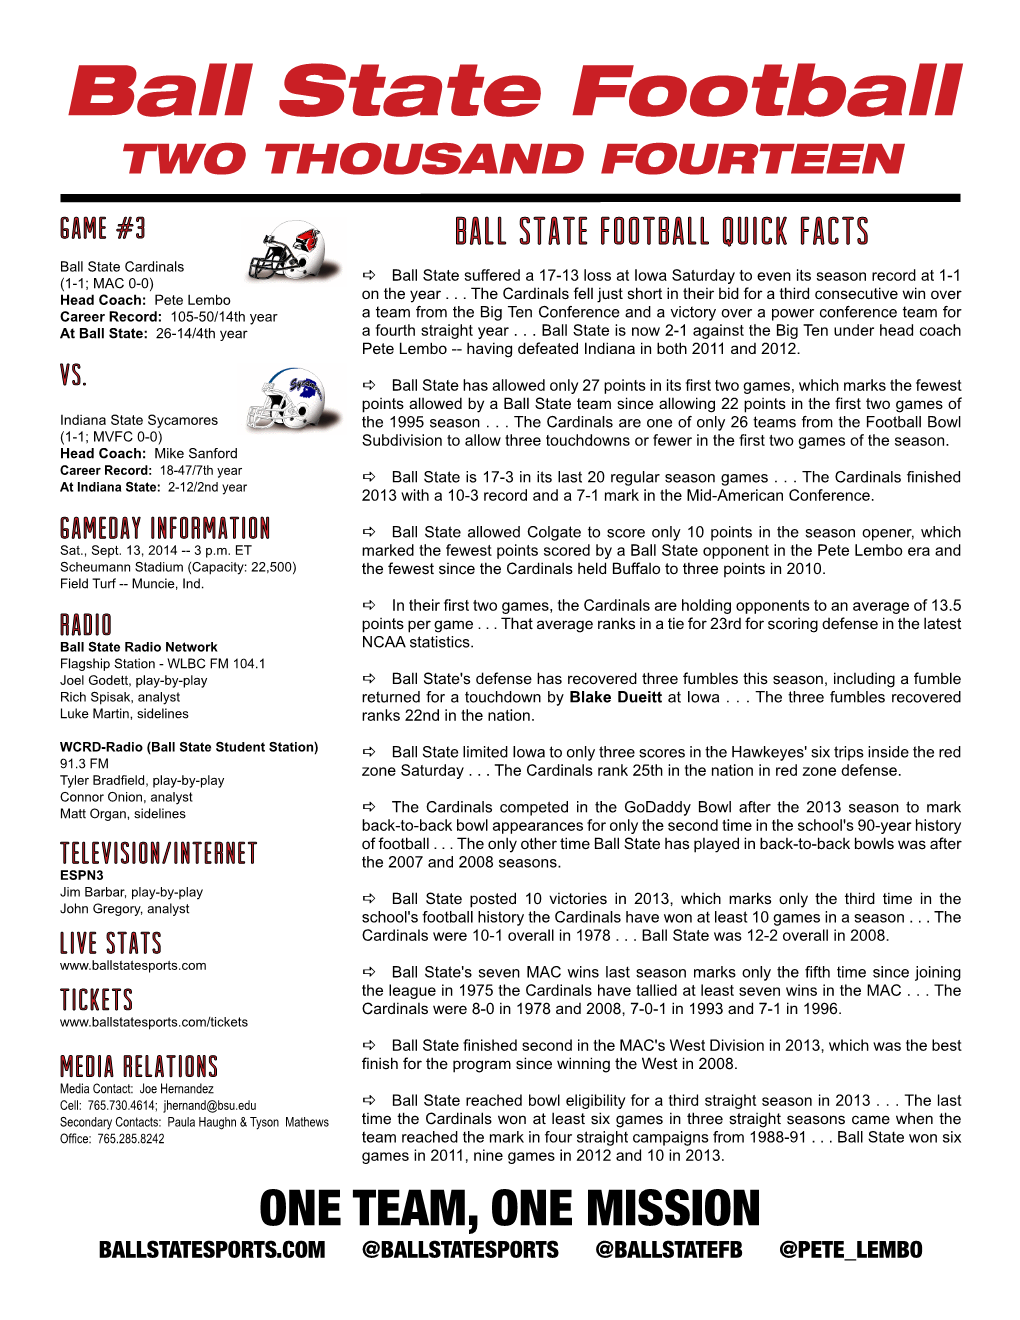 Ball State Football TWO THOUSAND FOURTEEN Game #3 Ball State Football Quick Facts